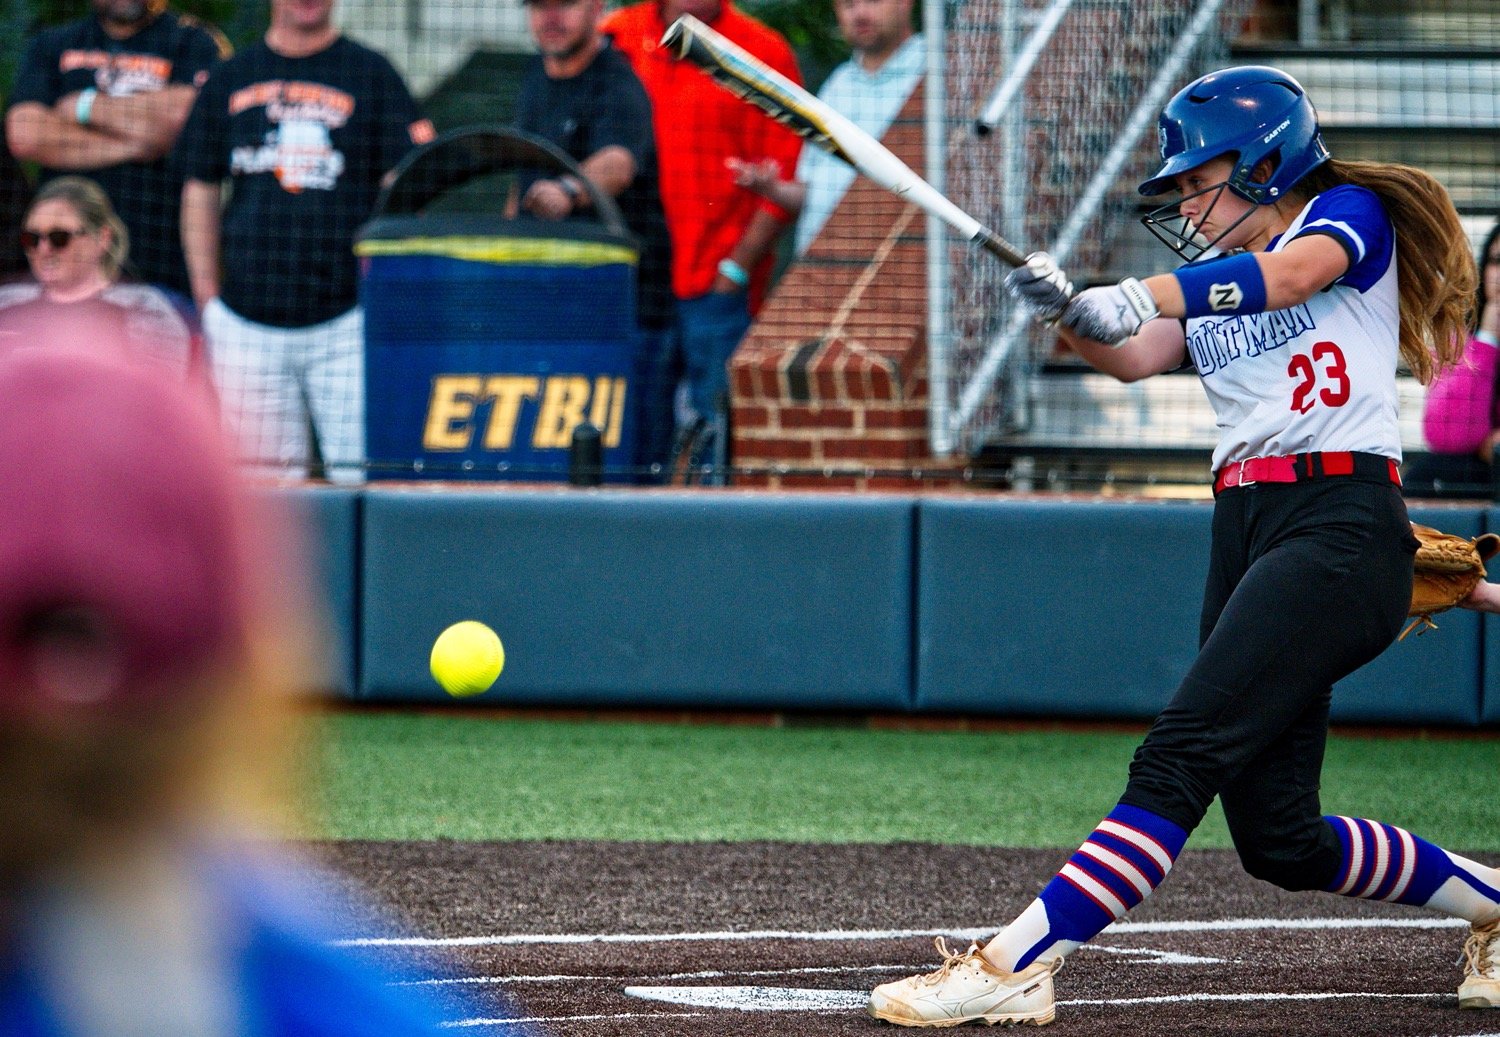 Larkin Spears takes a cut at the ball. She led Quitman in hitting in the second game. [catch more of Quitman]